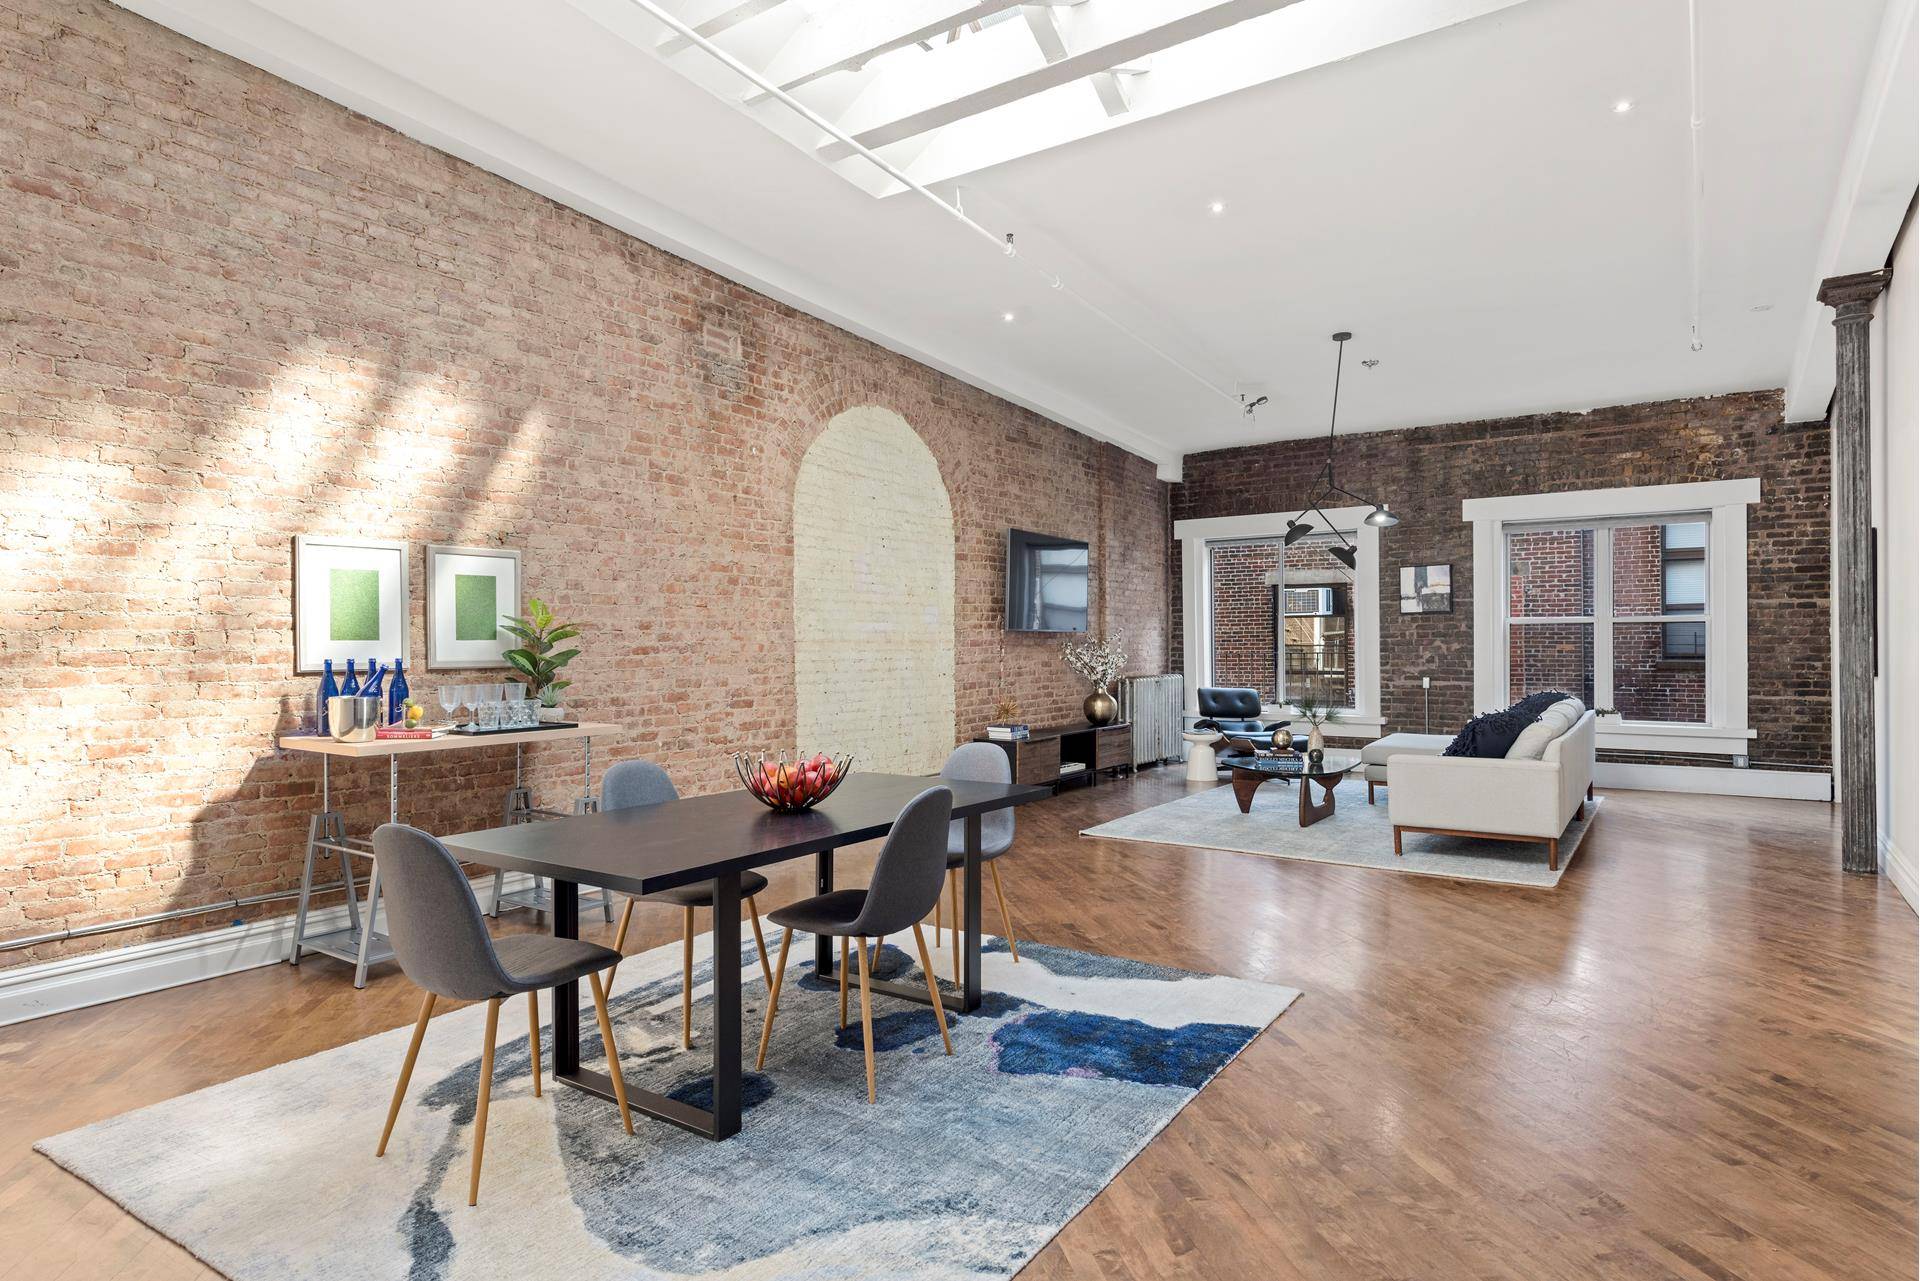 Quiet quintessential downtown loft in the heart of Tribeca with a private roof and potential for build out.